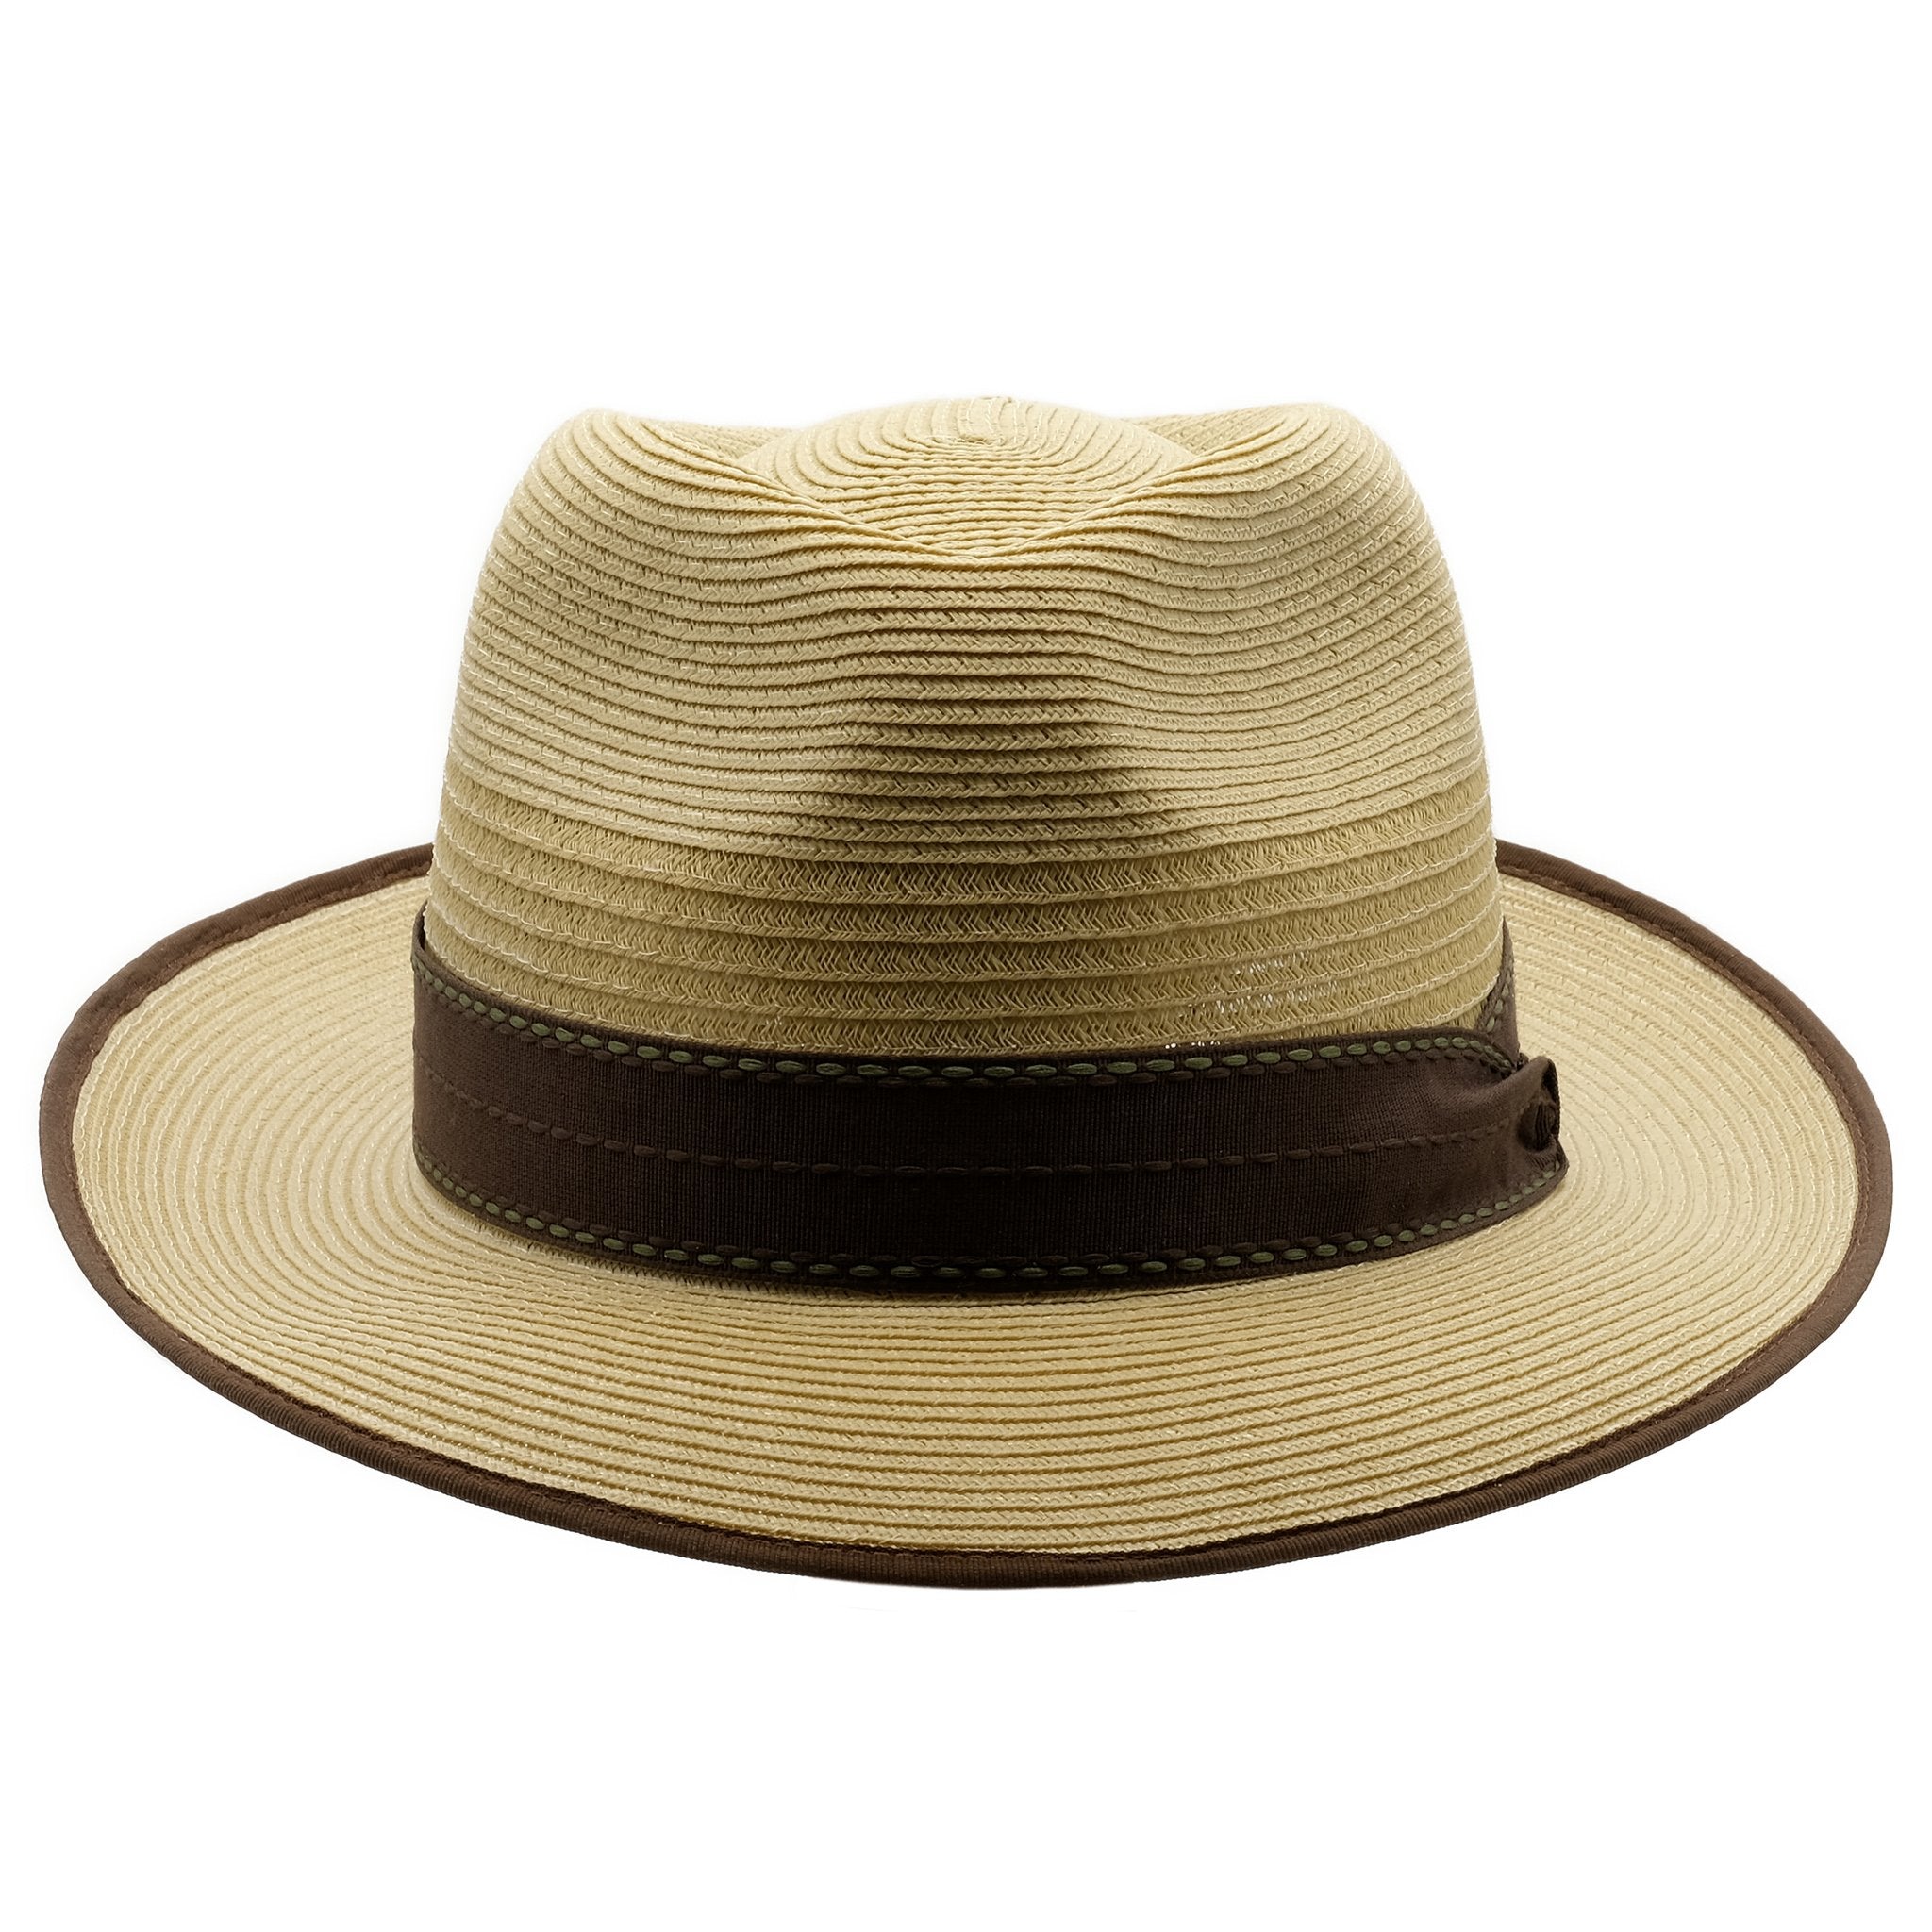 Front view of Akubra Capricorn hat in Fawn colour